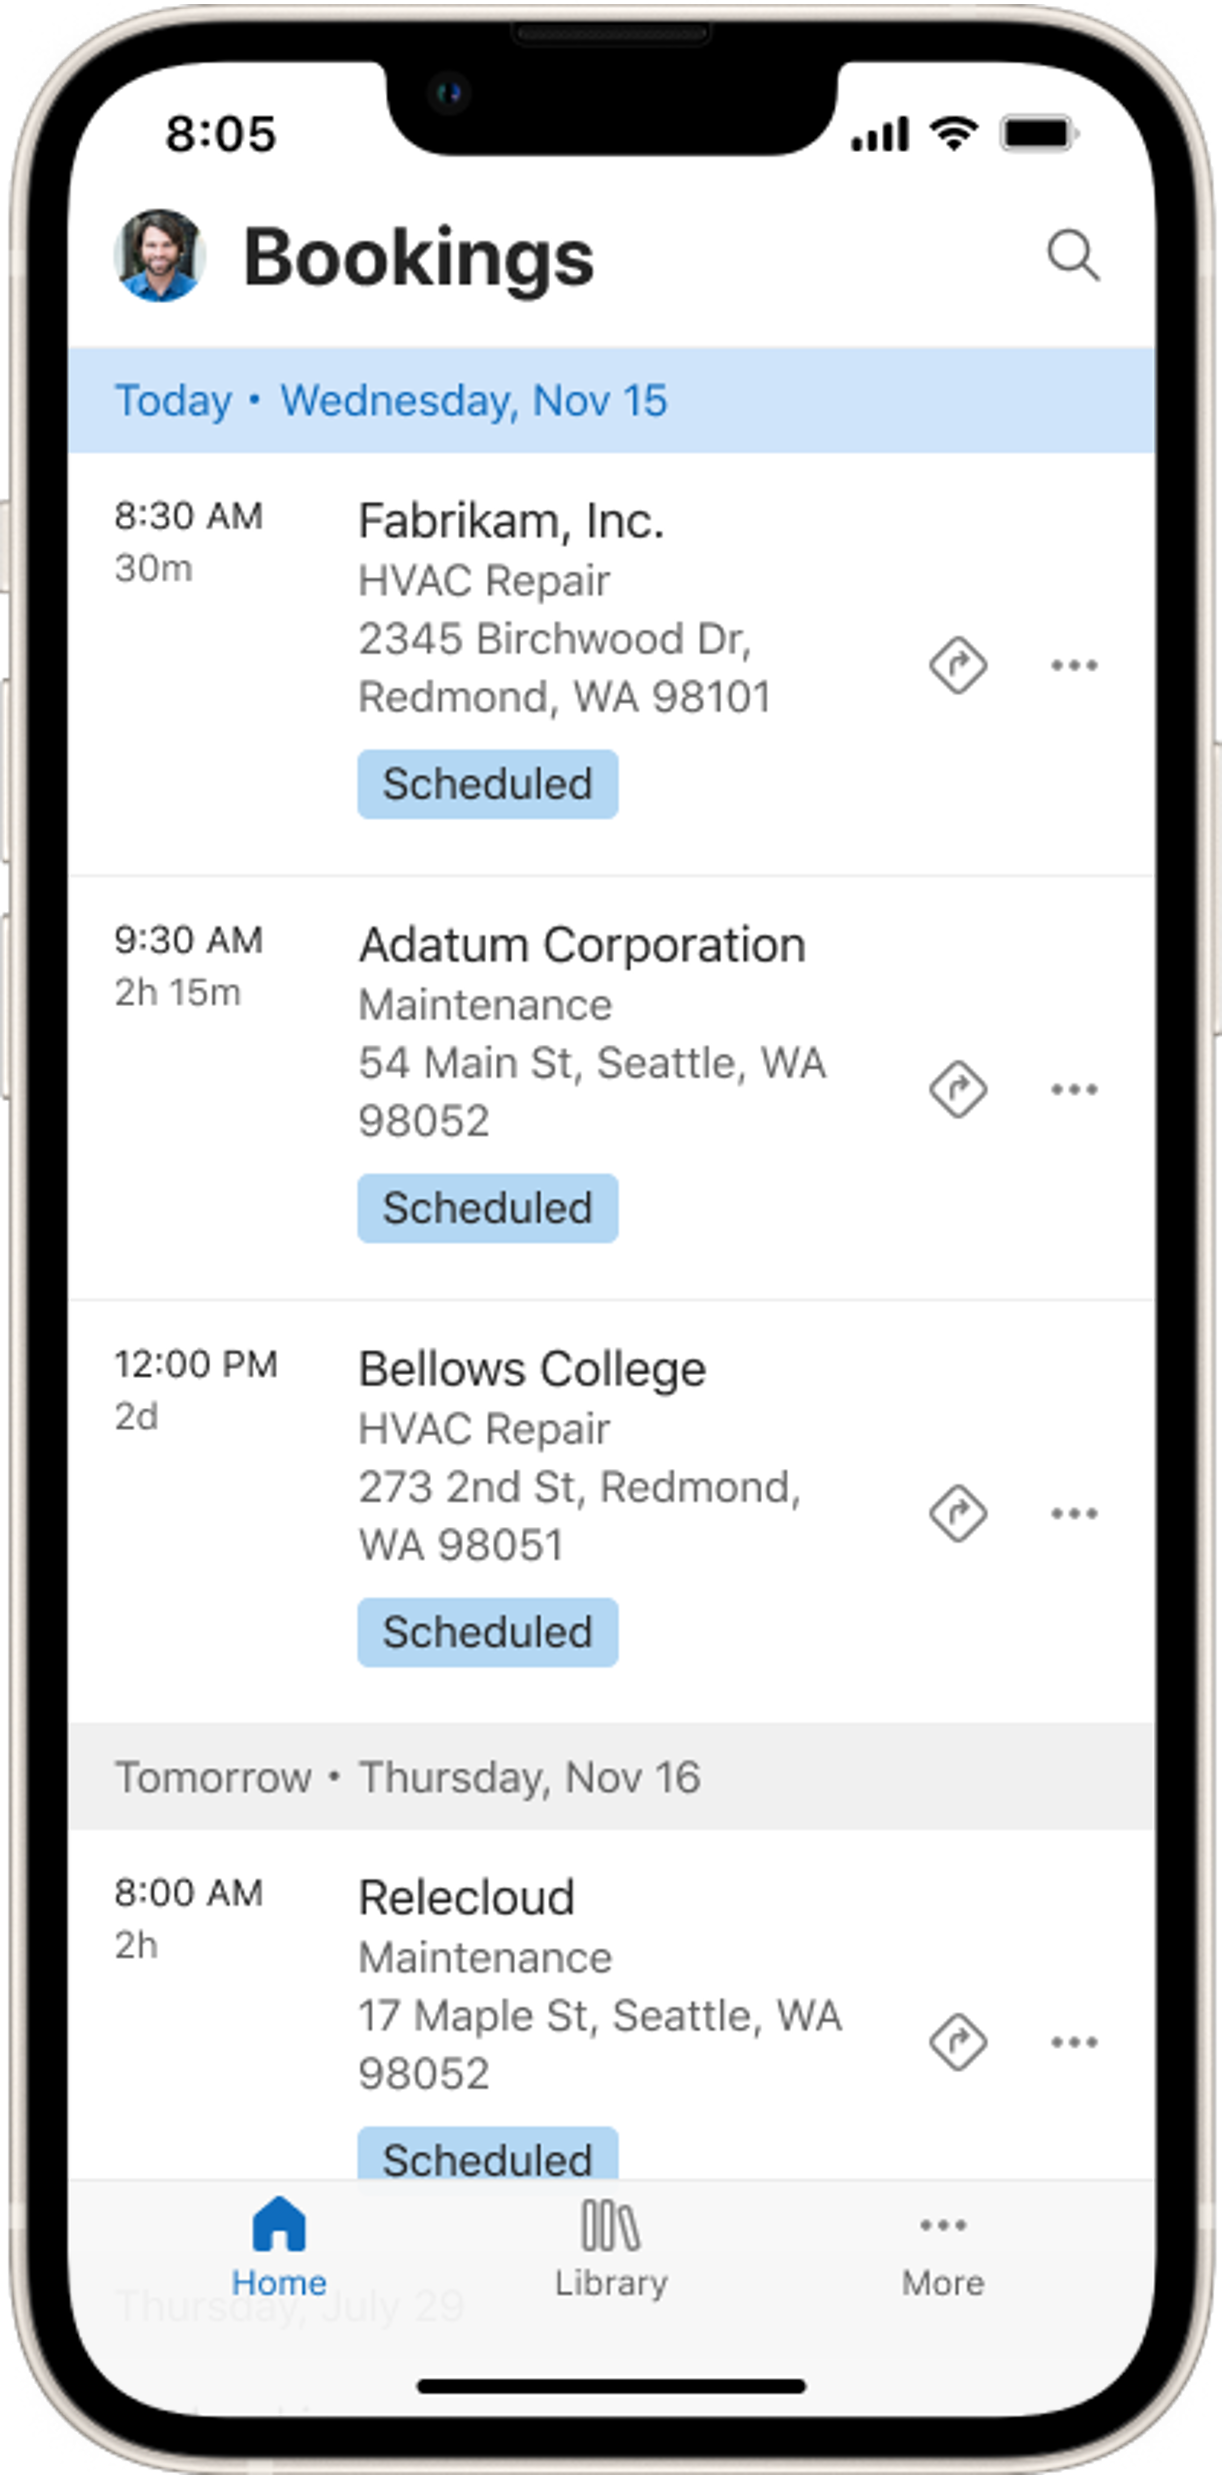 Rendering of a mobile device showing the Agenda View with today's and tomorrow's bookings in the Field Service mobile app.